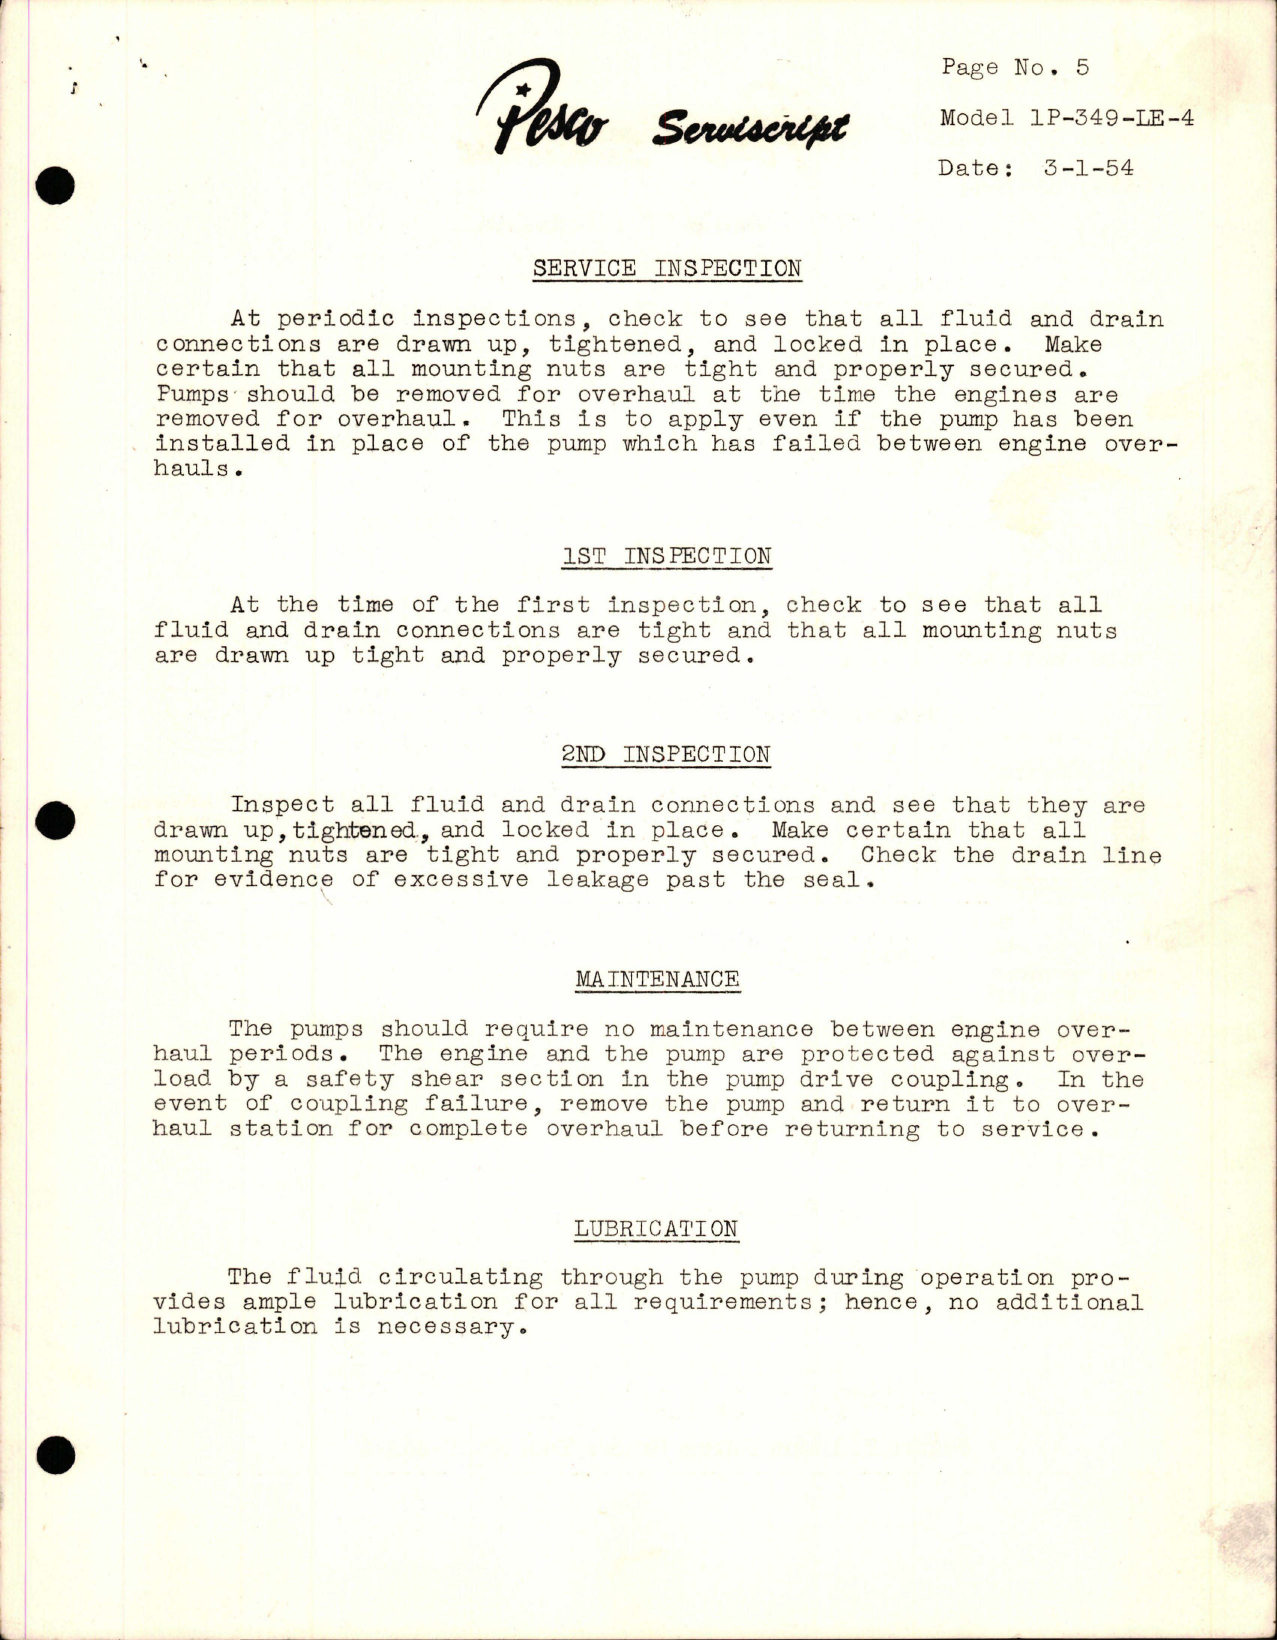 Sample page 5 from AirCorps Library document: Pesco Serviscript Maintenance and Overhaul Instructions for Hydraulic Gear Pump - Model 1P-349-LE-4